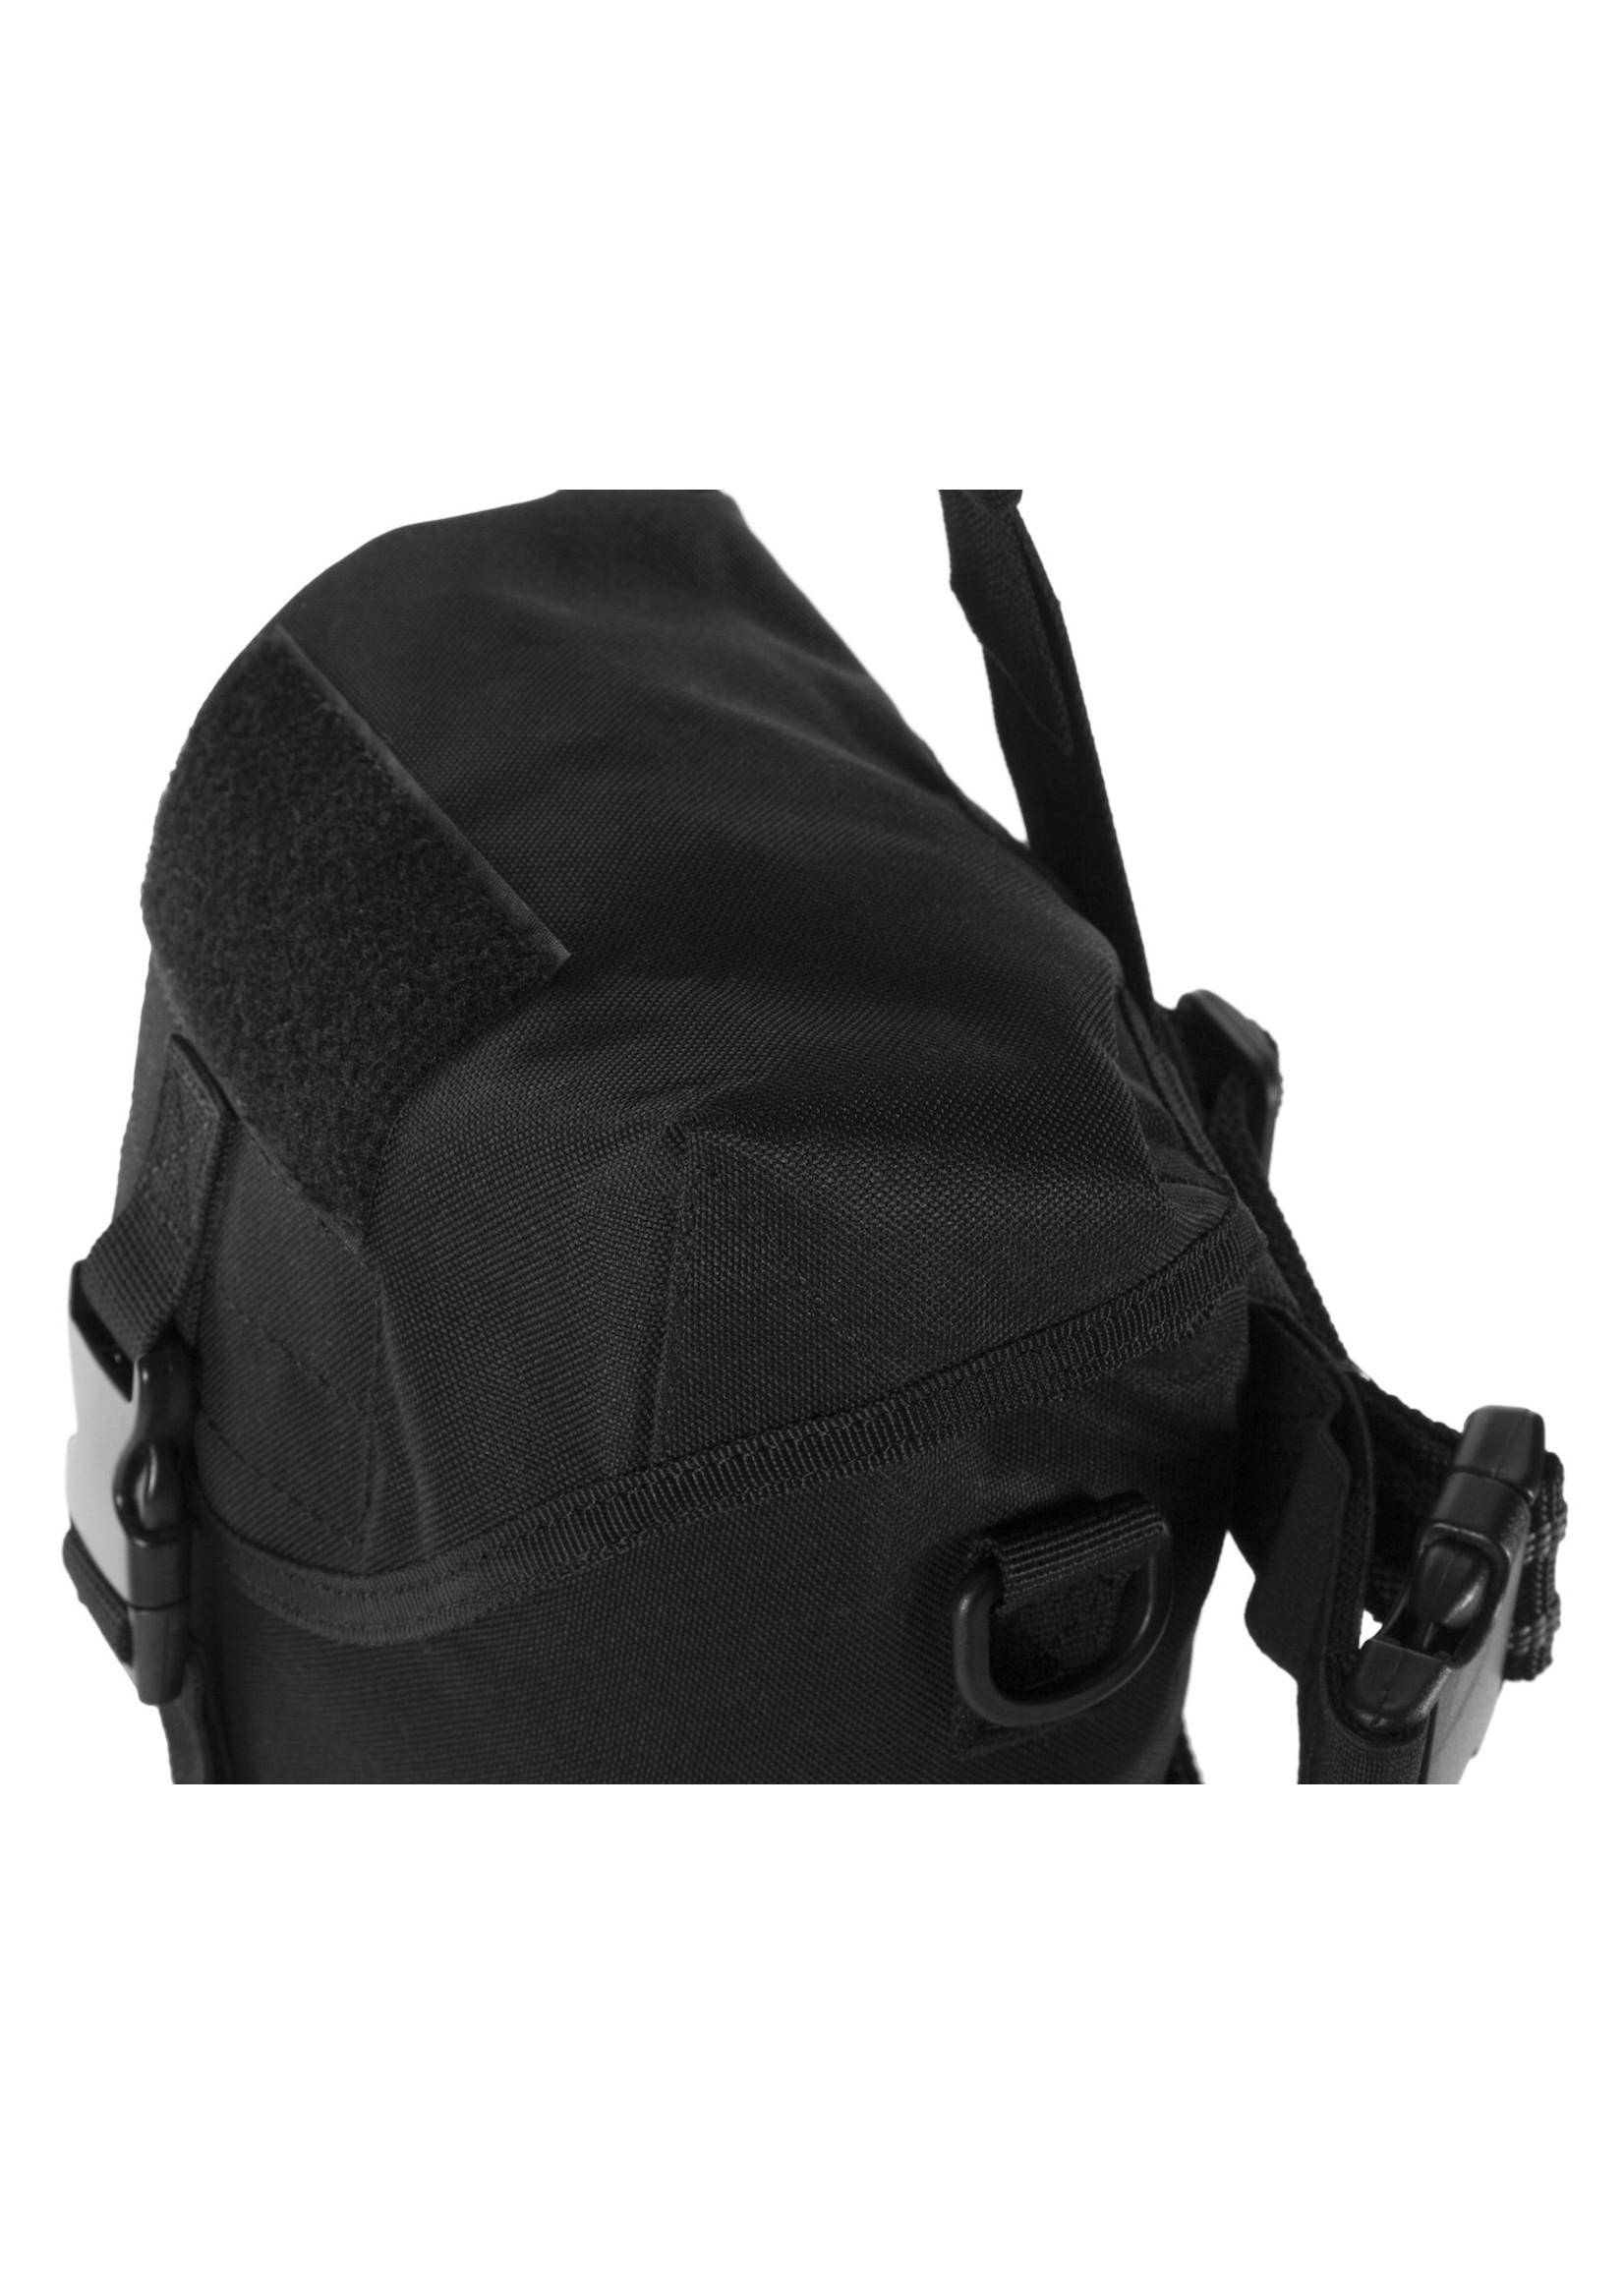 MIRA SAFETY MILITARY POUCH / GAS MASK BAG V2